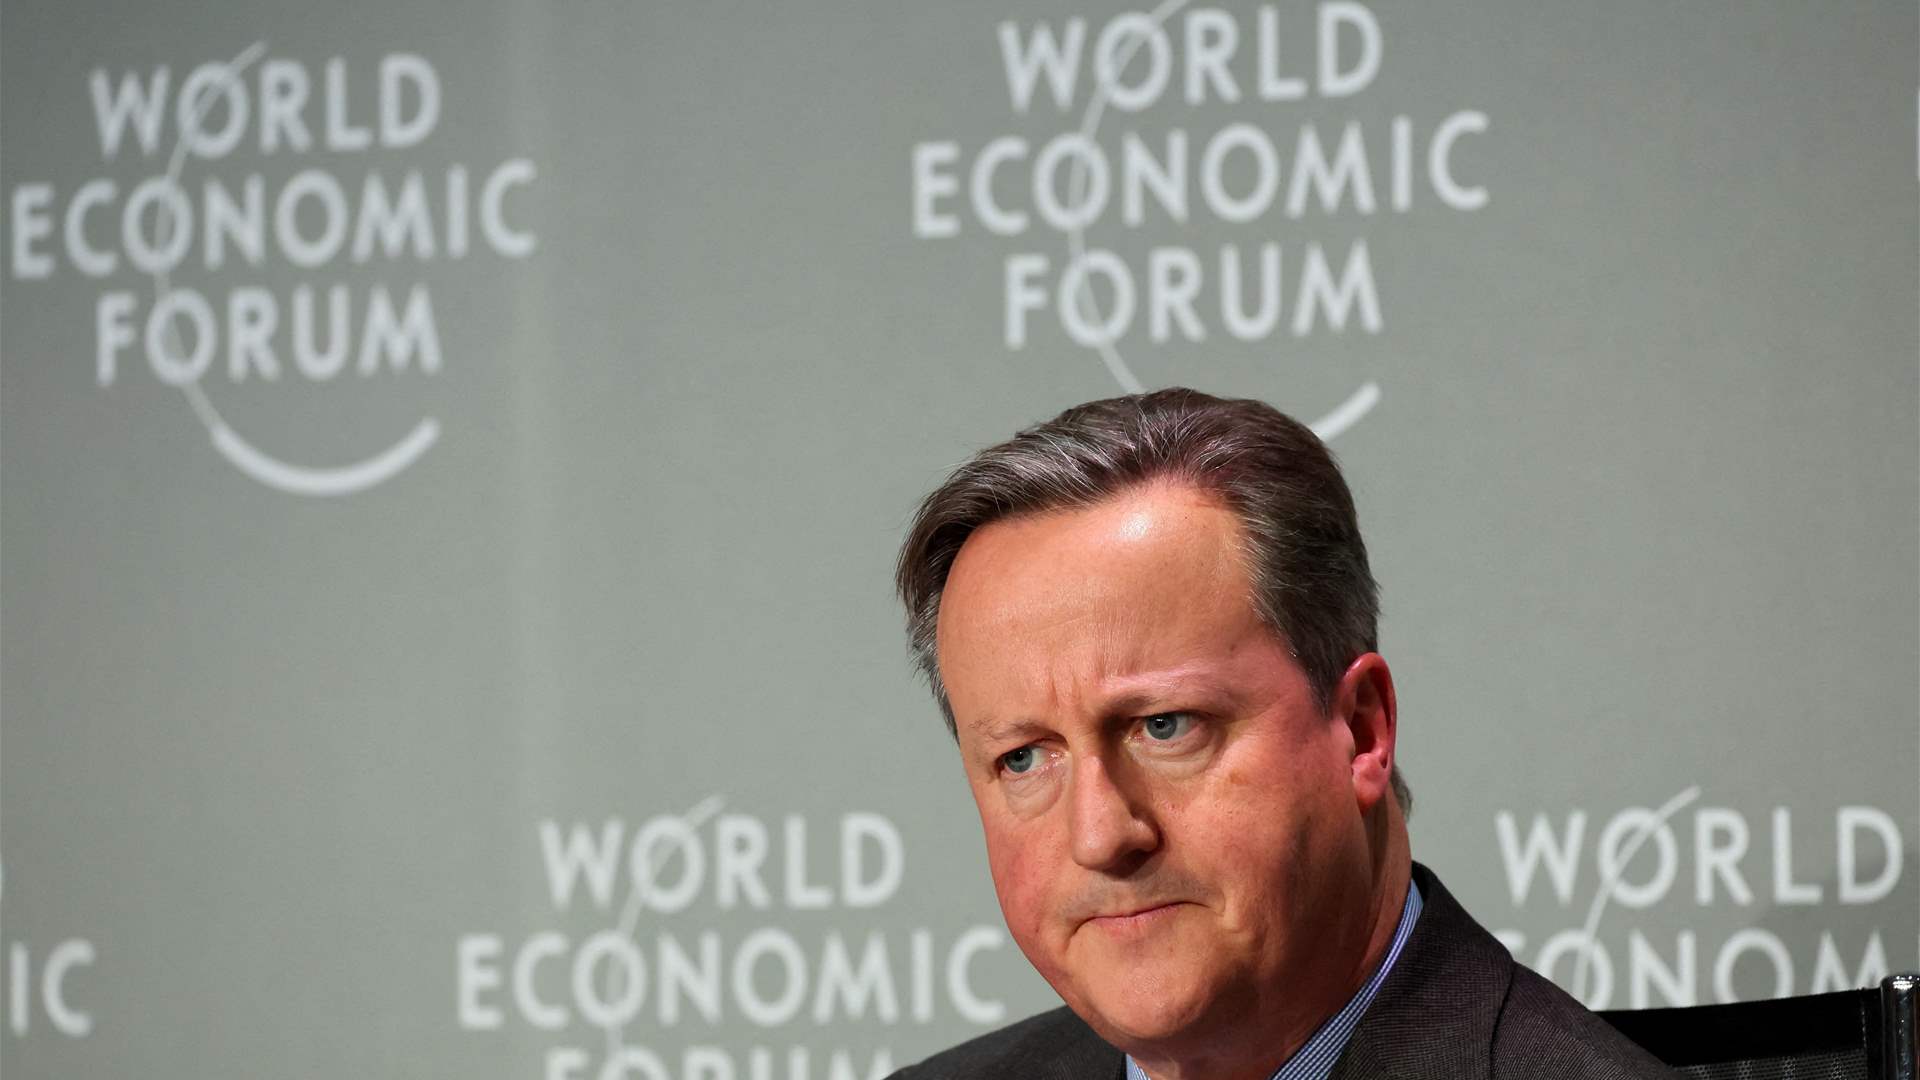 Cameron to Israel: More aid needs to be able to enter Gaza